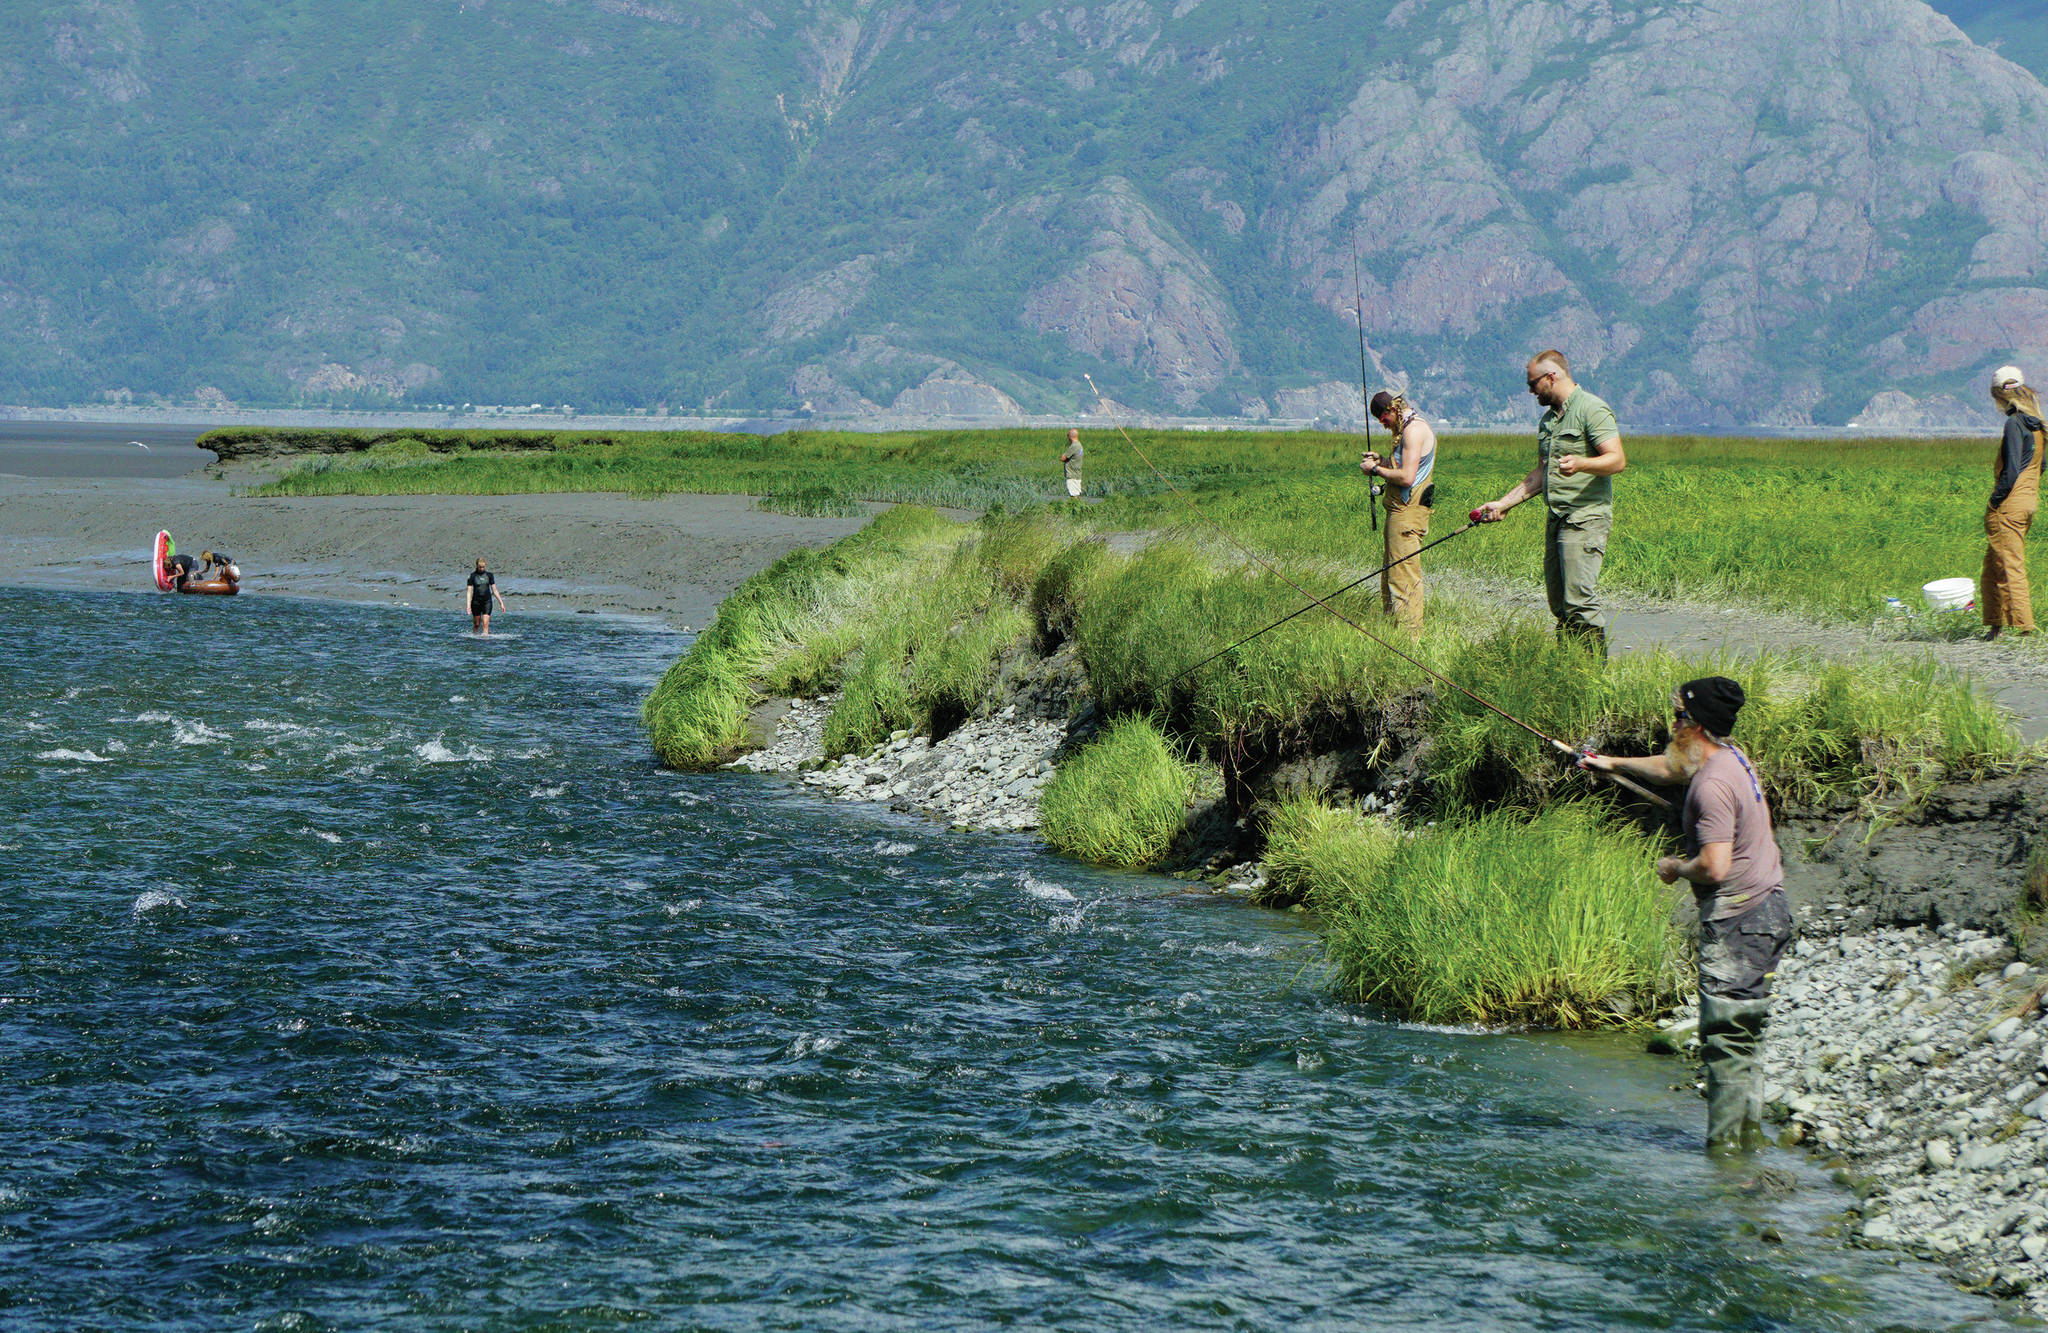 Fishermen try to catch silver and pink salmon on Tuesday, July 21, 2020, at the mouth of Resurrection Creek in Hope, Alaska. (Photo by Michael Armstrong/Homer News)